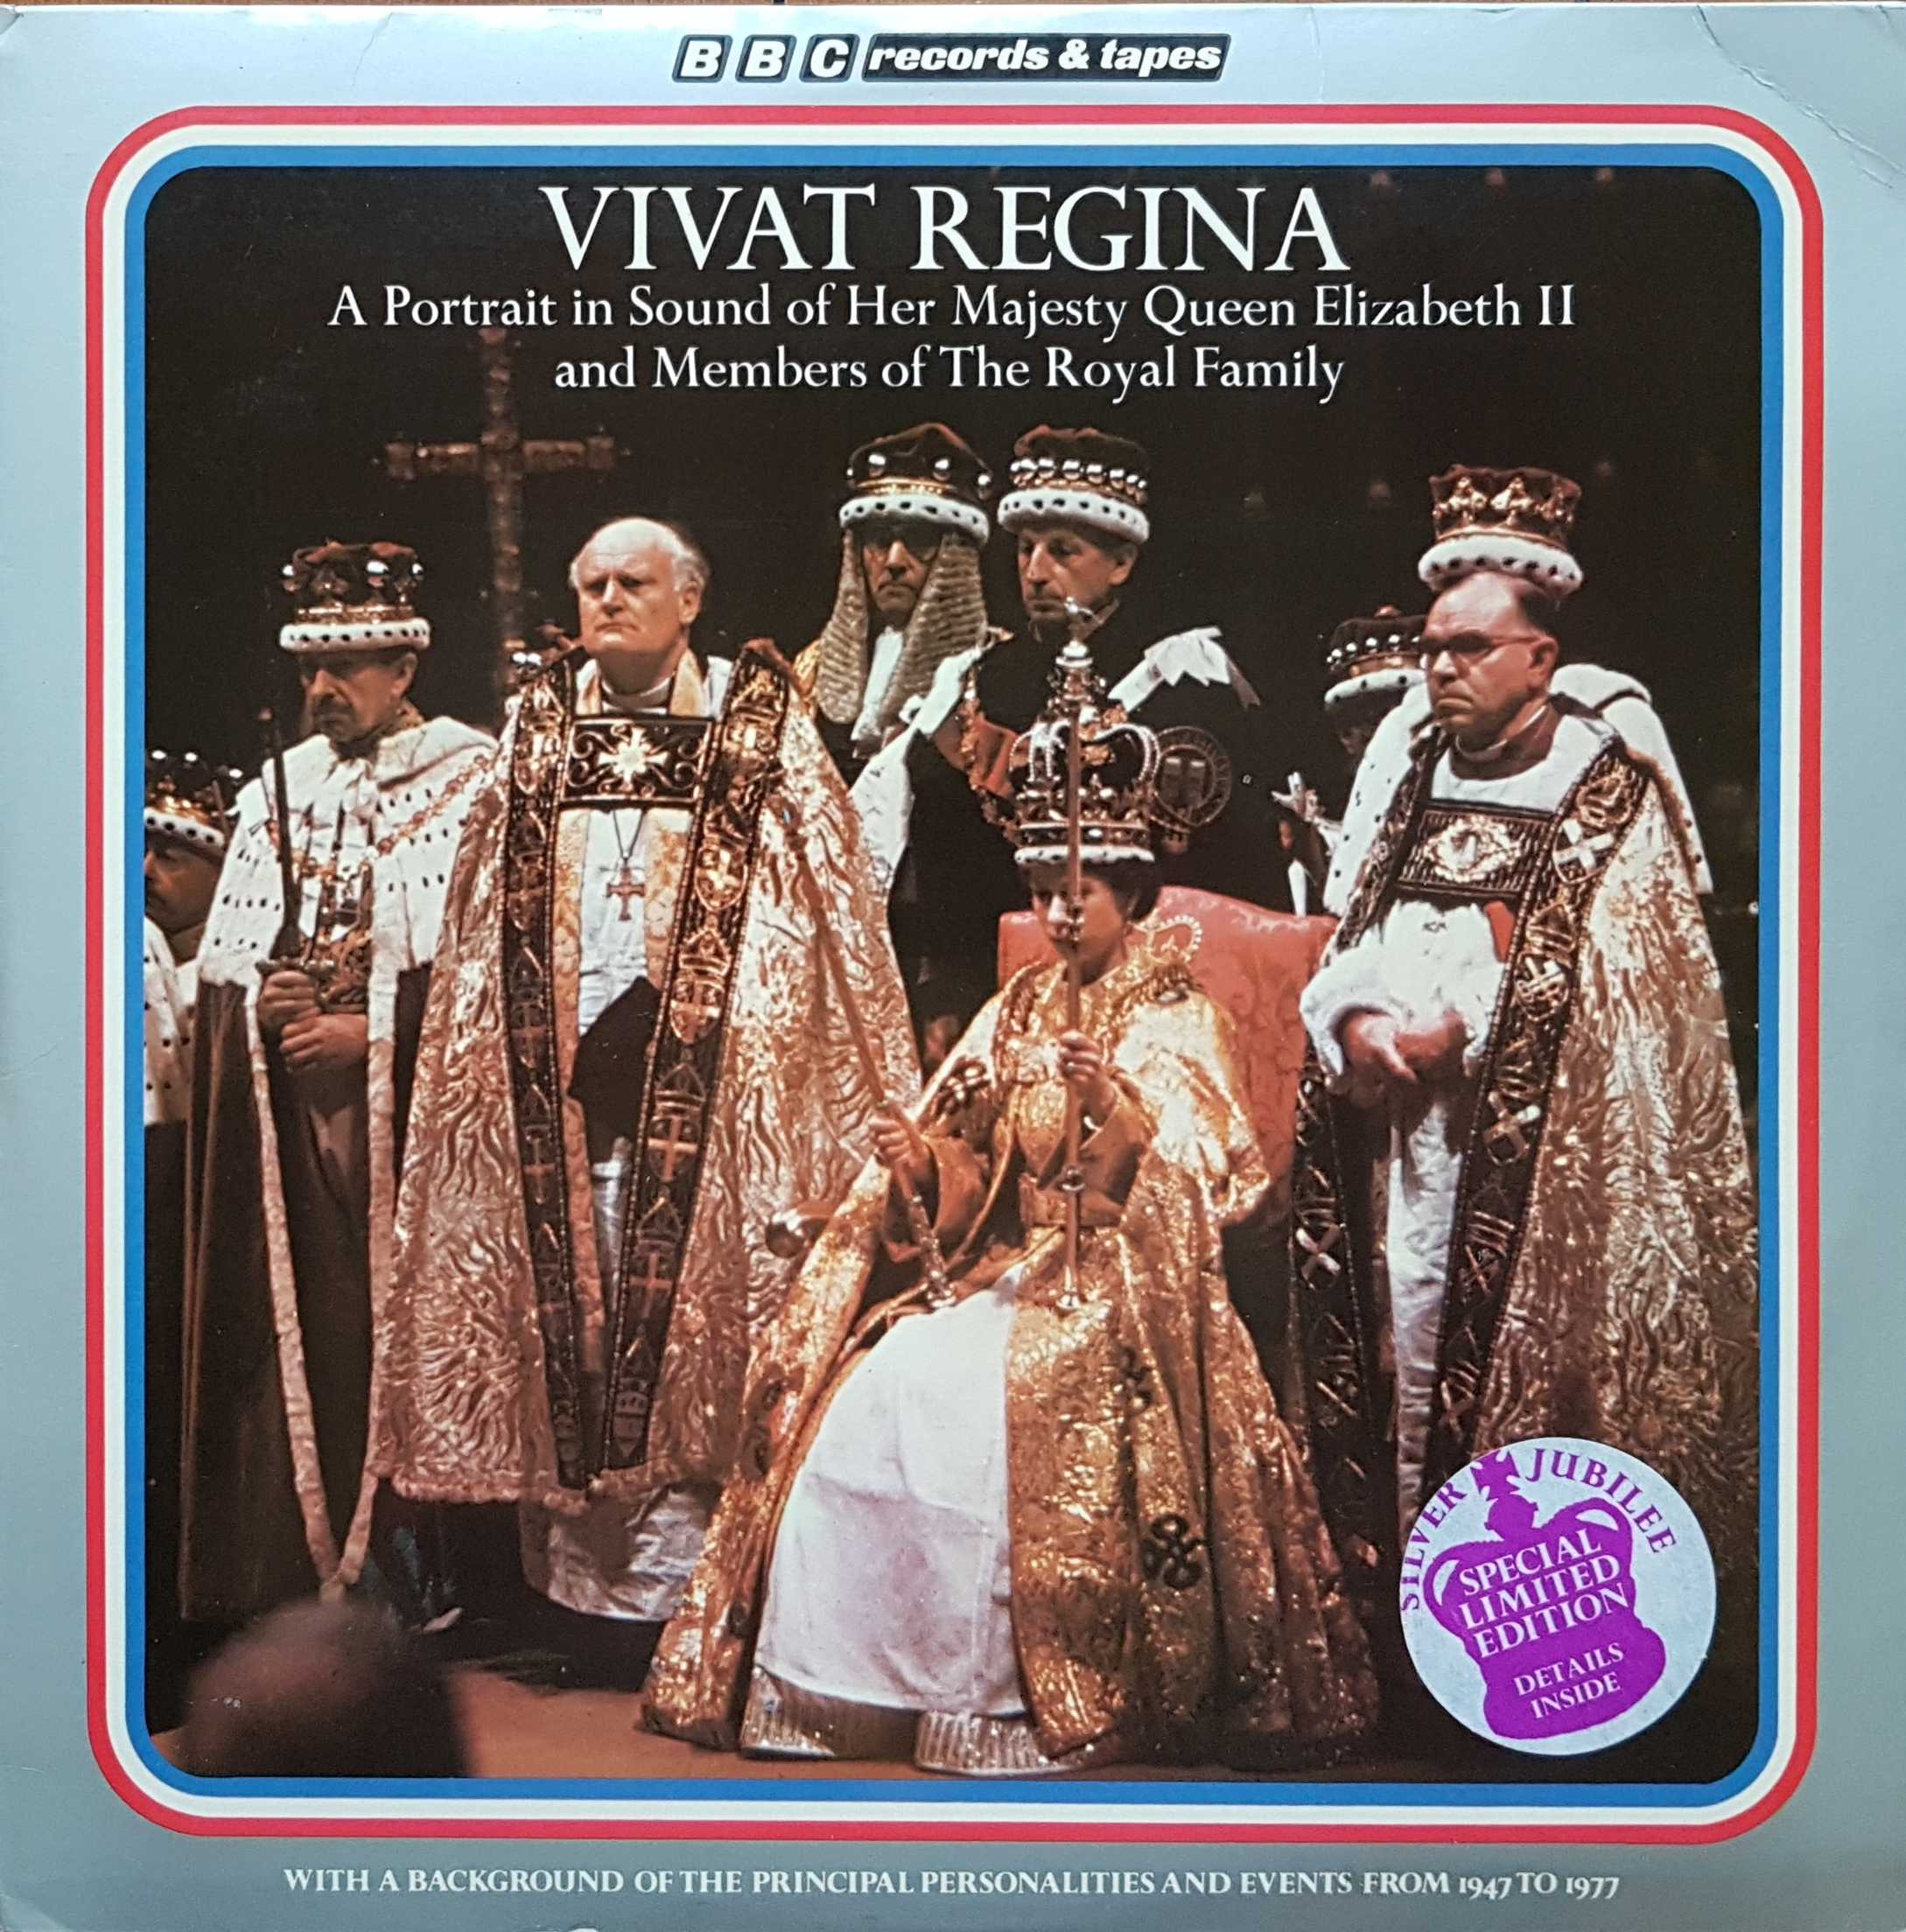 Picture of REL 273 The silver jubilee - Vivat regina by artist Robert Hudson from the BBC albums - Records and Tapes library